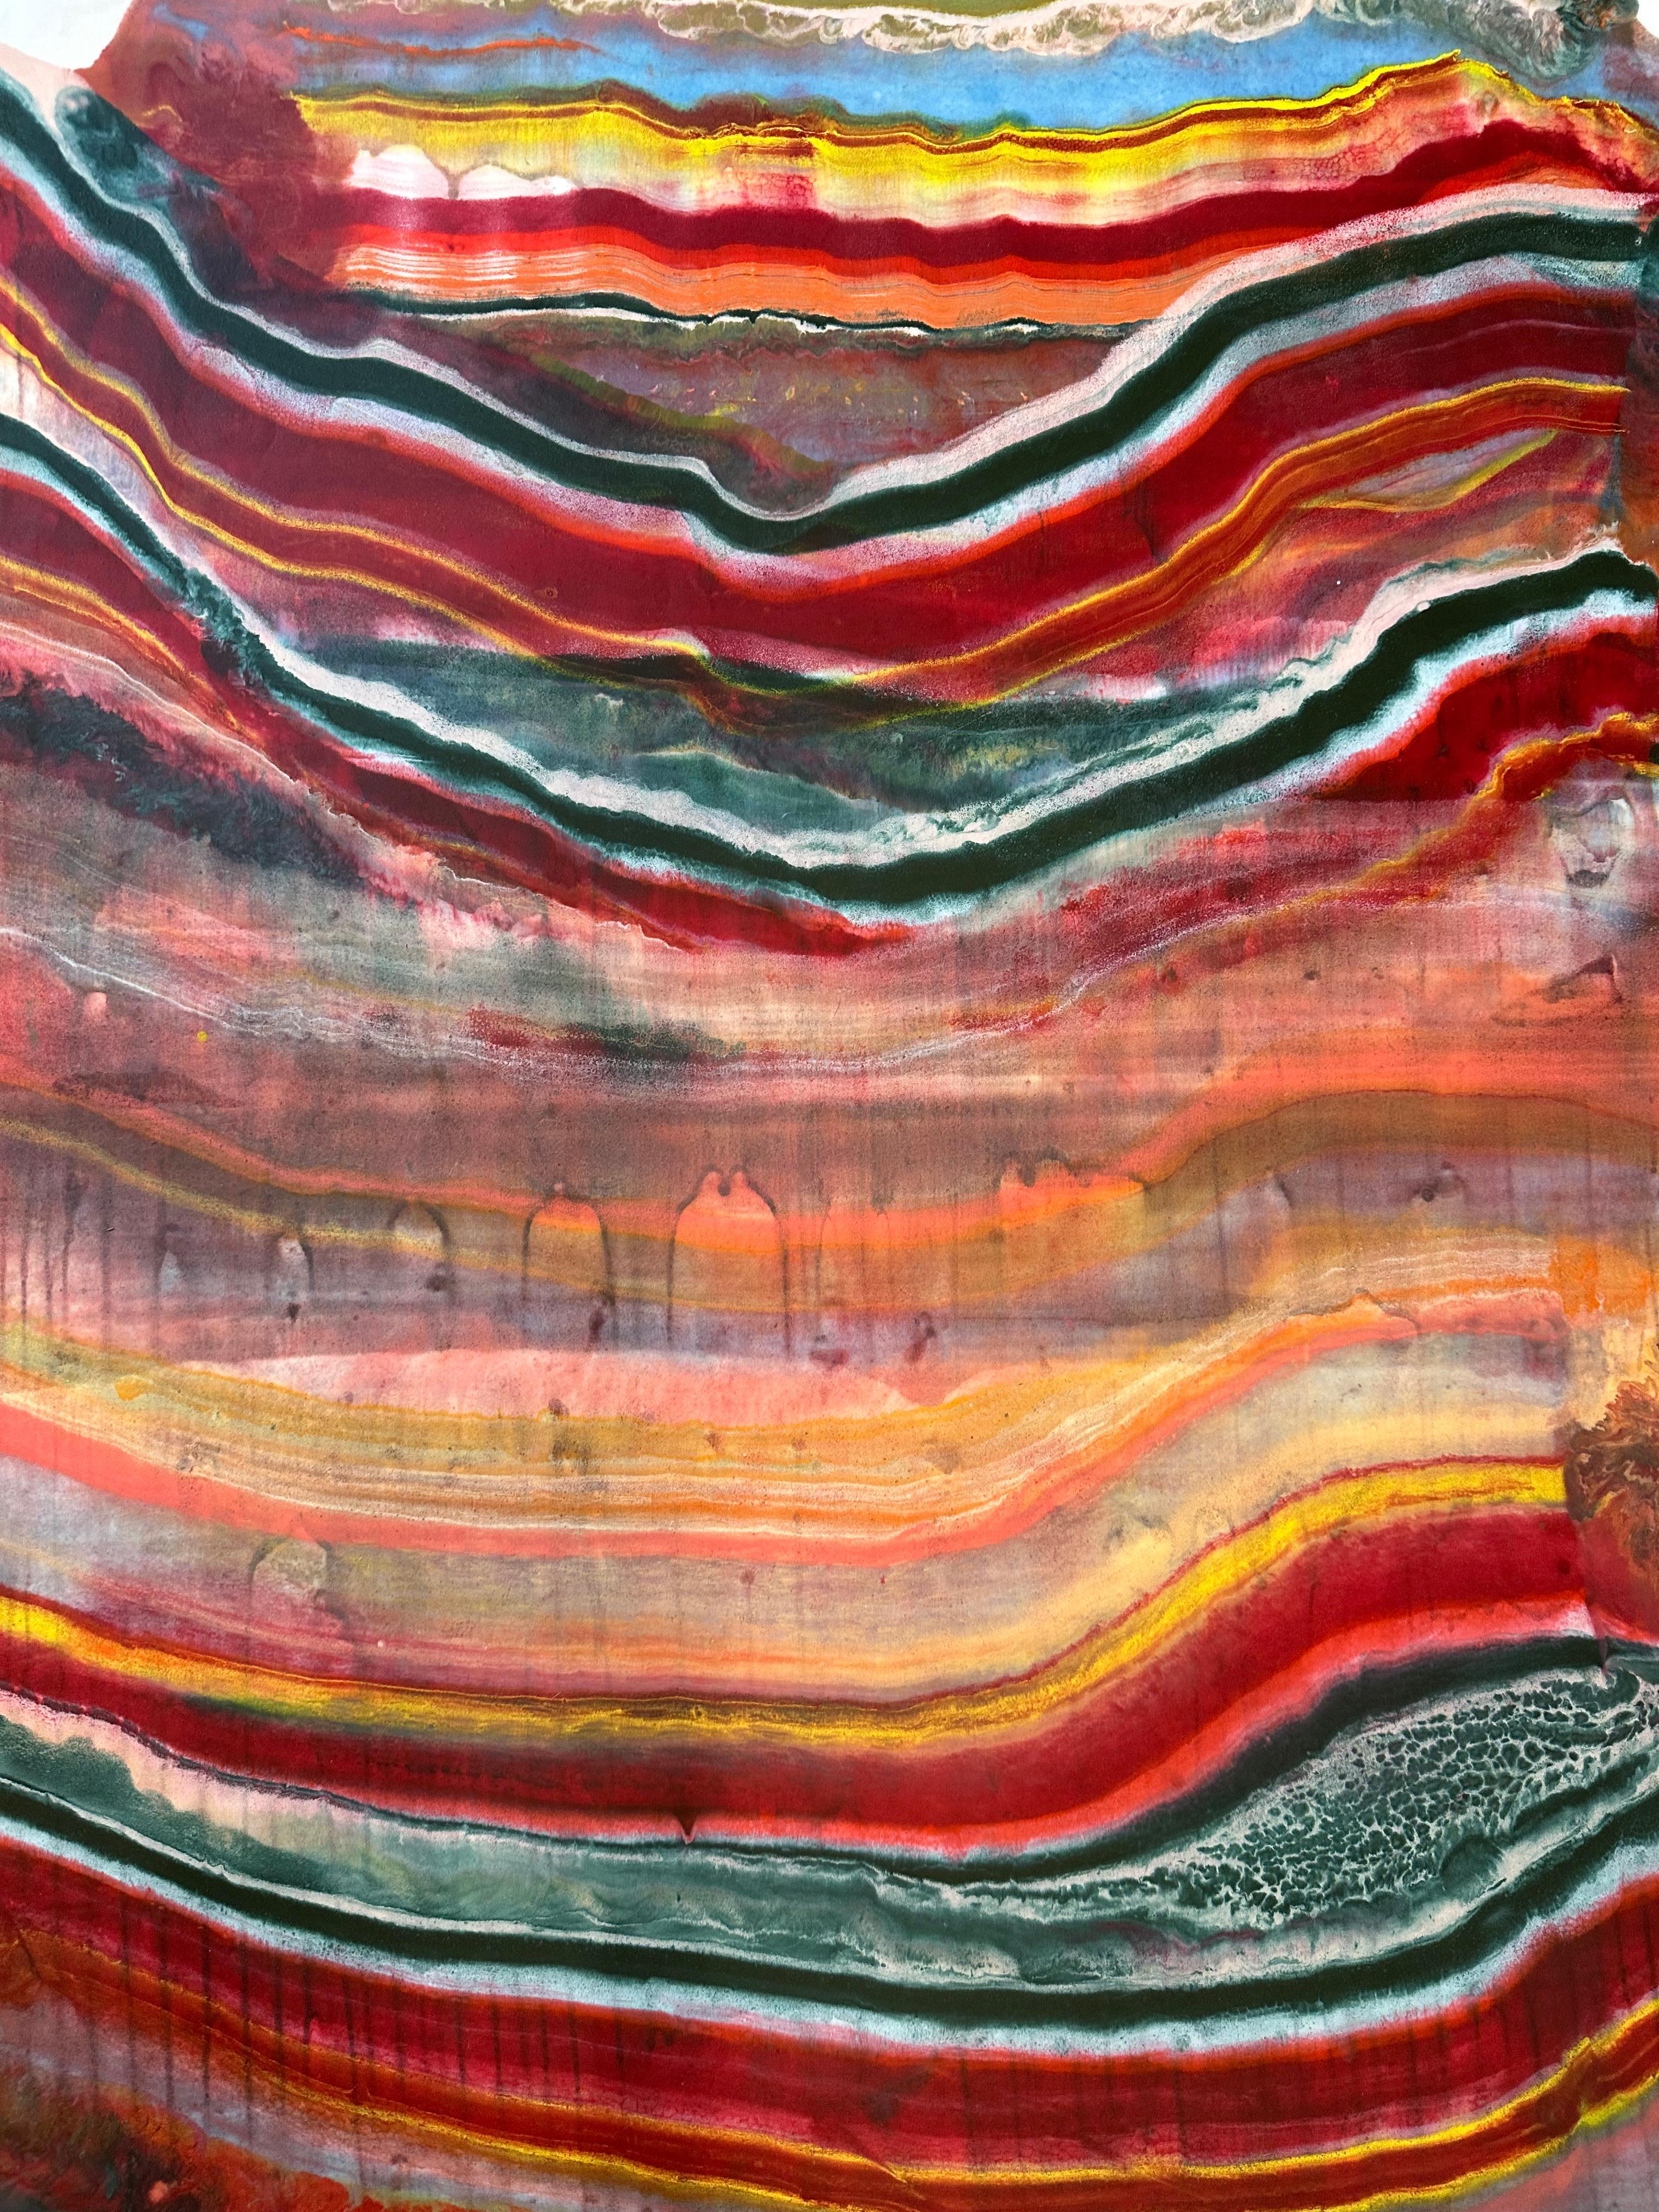 Laura Moriarty's Talking to Rocks 23 is a multicolored encaustic monotype on kozo paper. Layers of pigmented beeswax on lightweight paper create an undulating composition suggesting layers of the earth's crust and geological formations depicted in